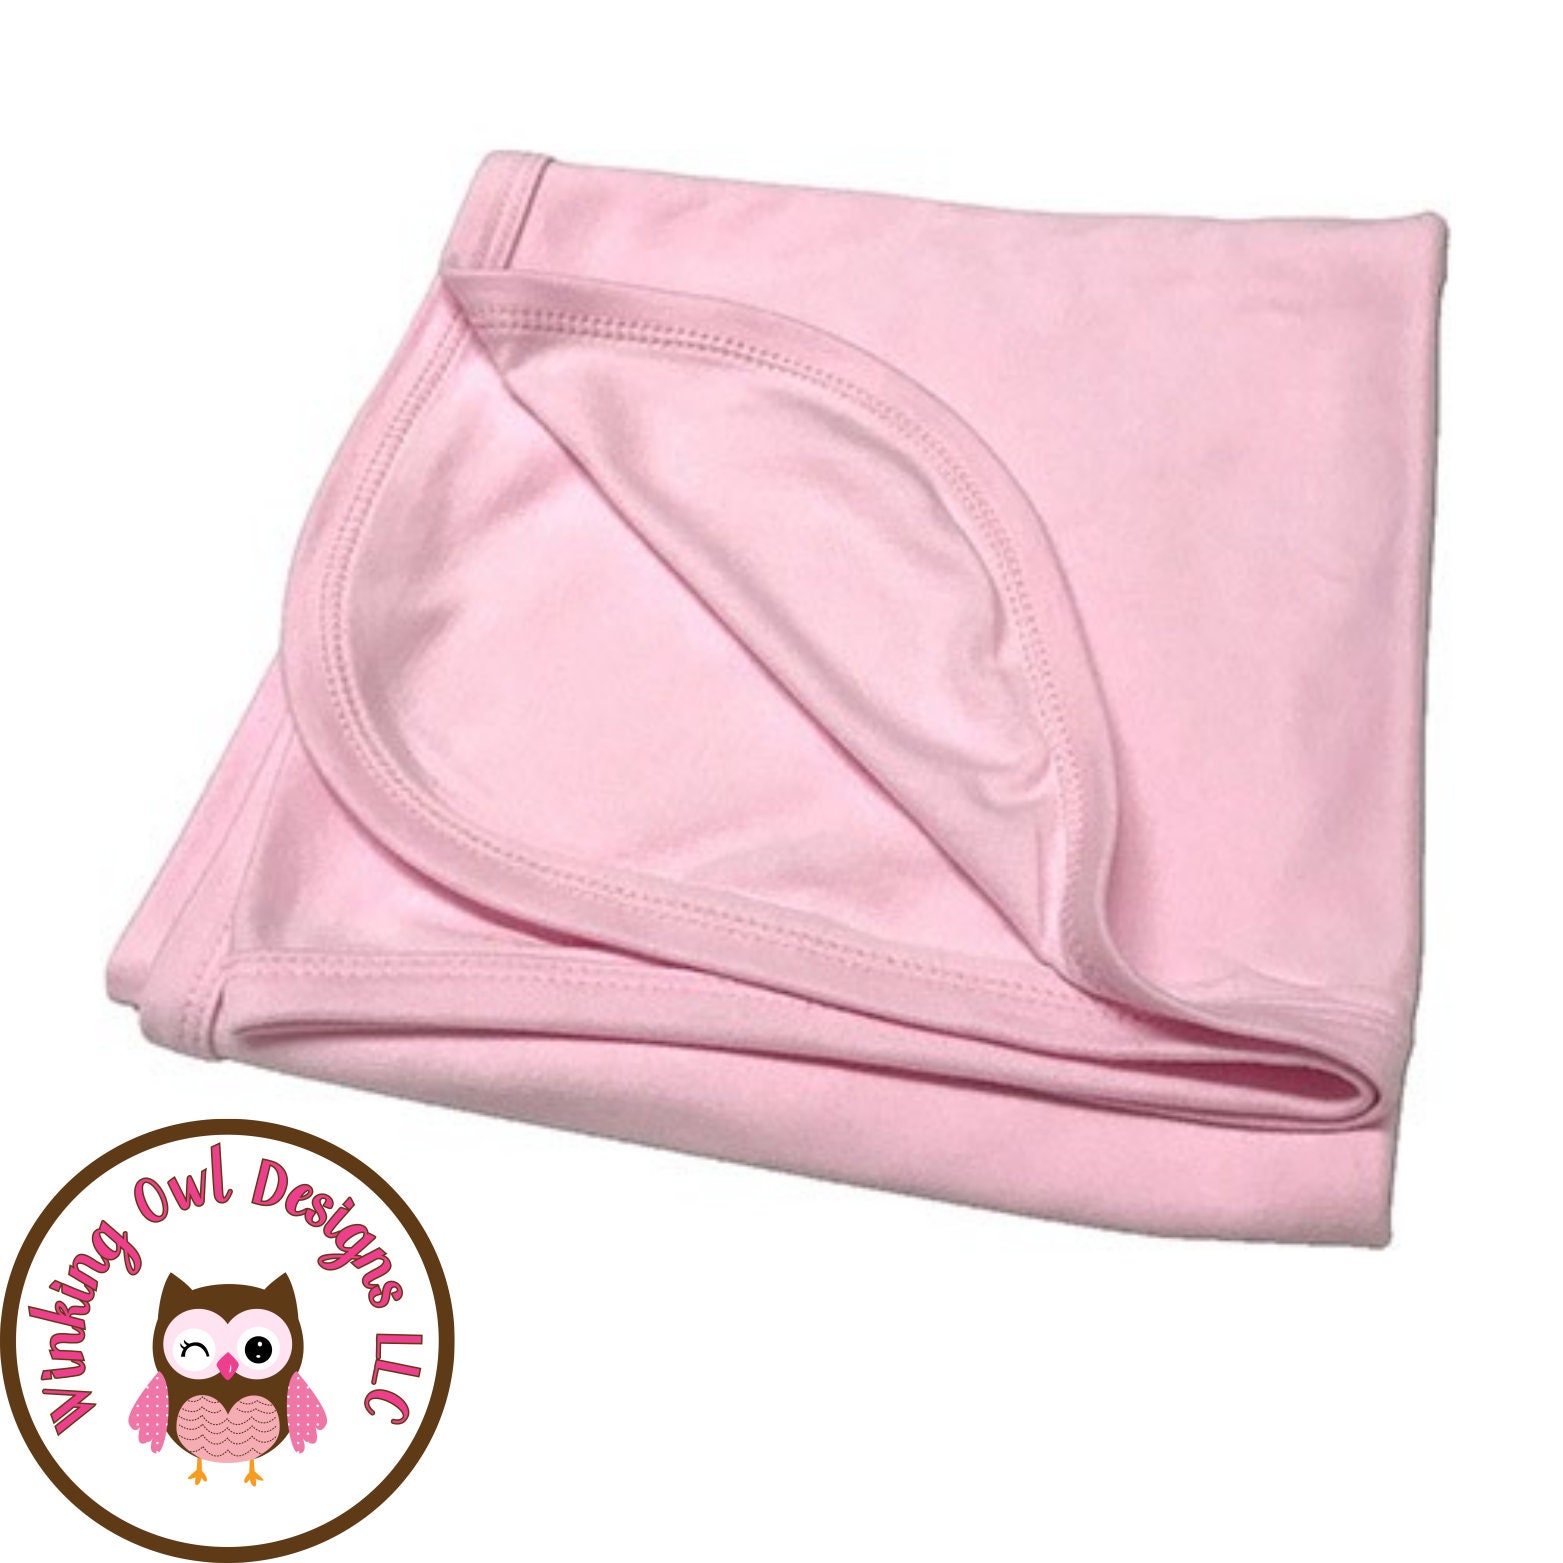 Sublimation Blanks - Poly/Cotton Blend 65/35% Infant Baby Receiving Blanket 30x40 Pink"